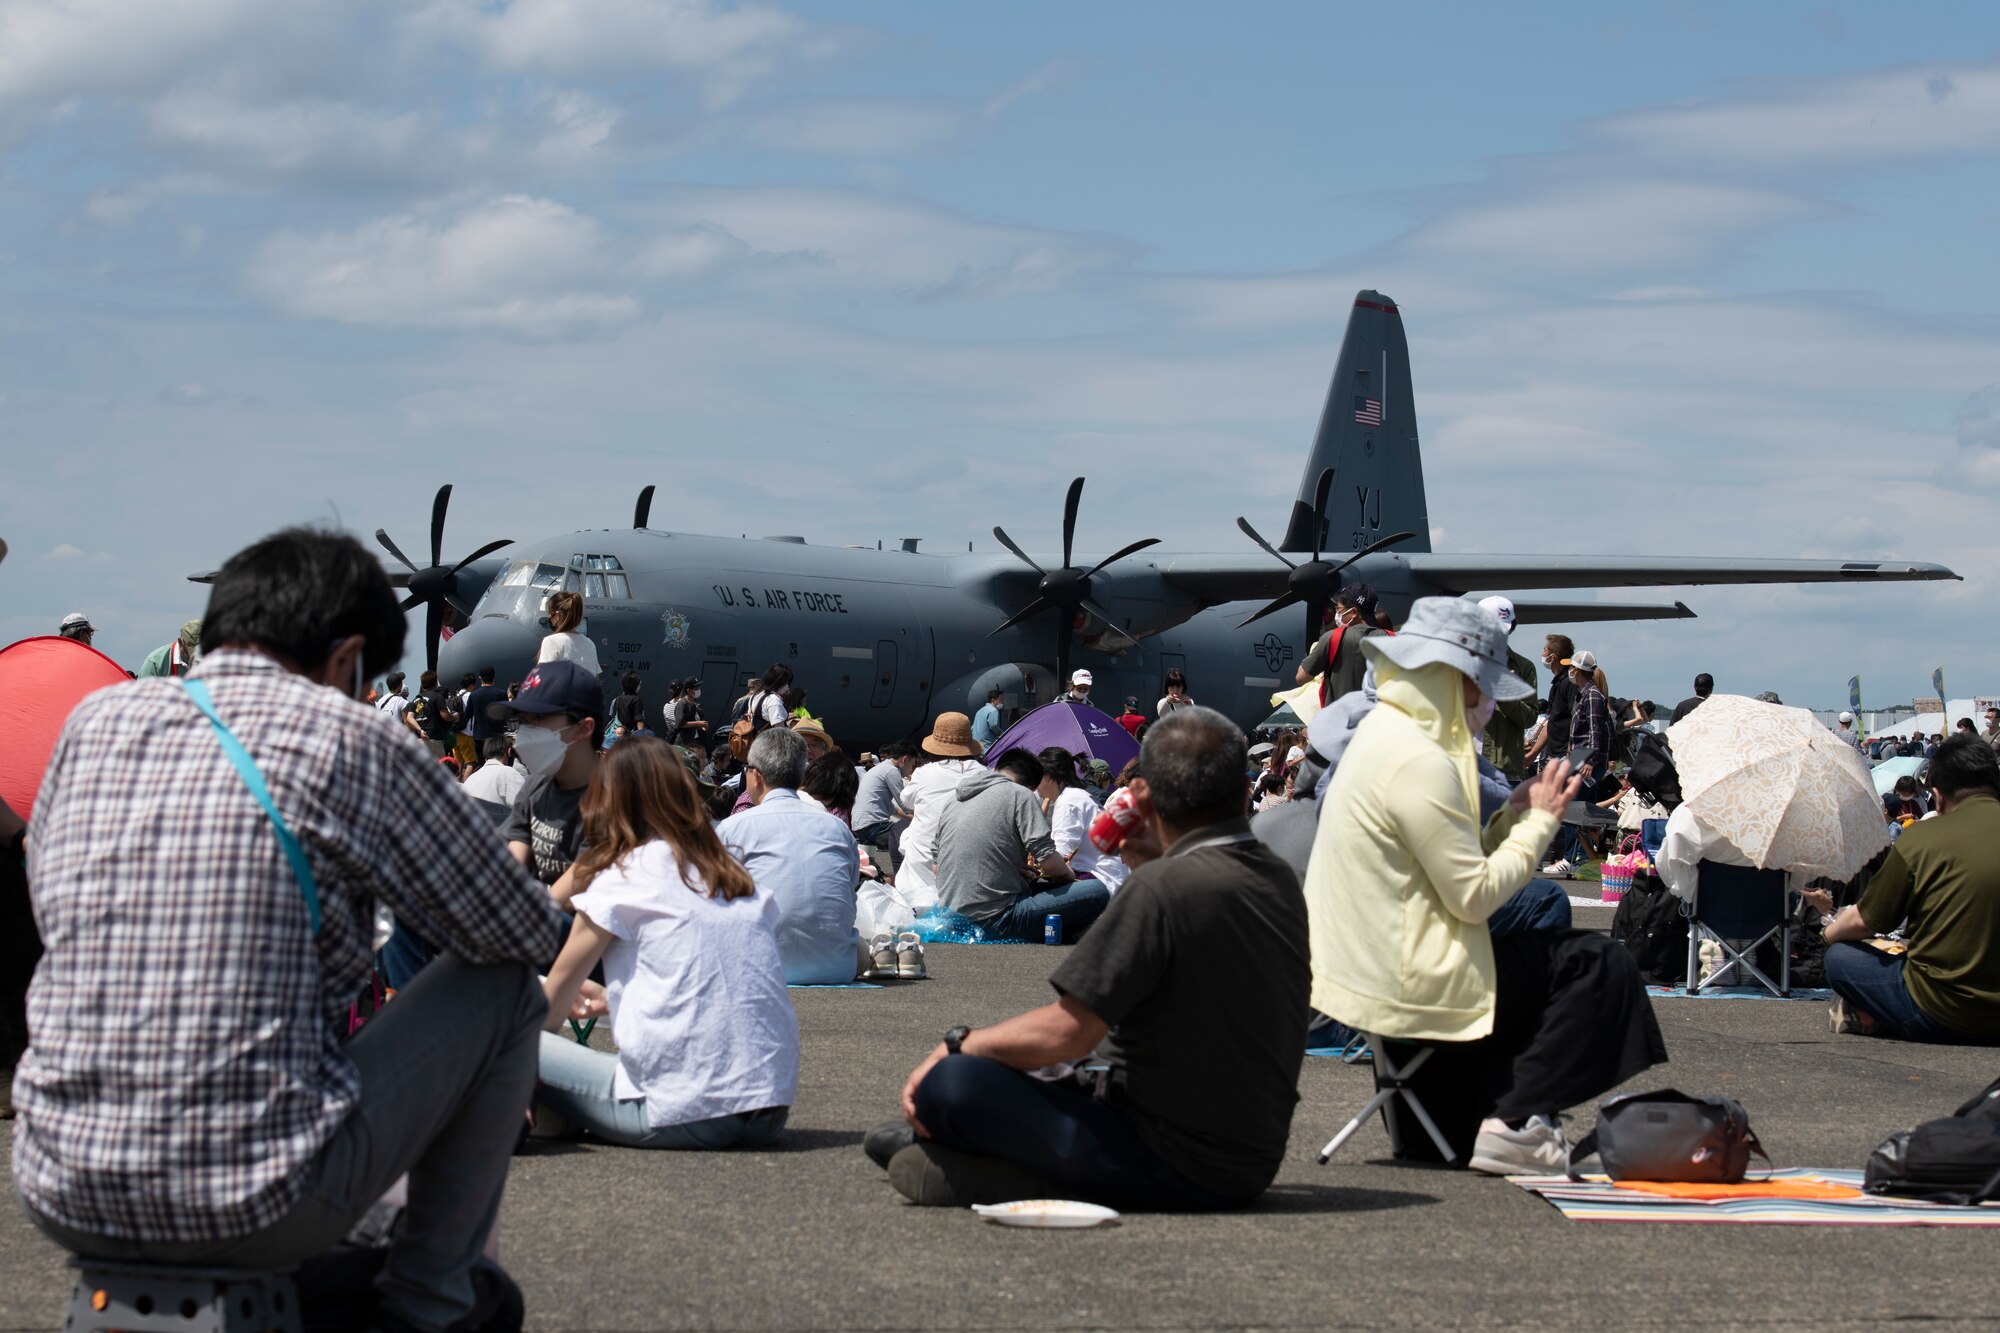 Attendees rest and eat lunch during Friendship Festival 2022, at Yokota Air Base, Japan, May 22. The two-day festival was an opportunity for visitors to learn more about the U.S. and Japan bilateral partnership, while strengthening the bonds between Yokota and the local communities. Yokota was able to host the event with the support of Japanese Self-Defense Force, sister services and the local community. (U.S. Air Force photo by Tech. Sgt. Joshua Edwards)